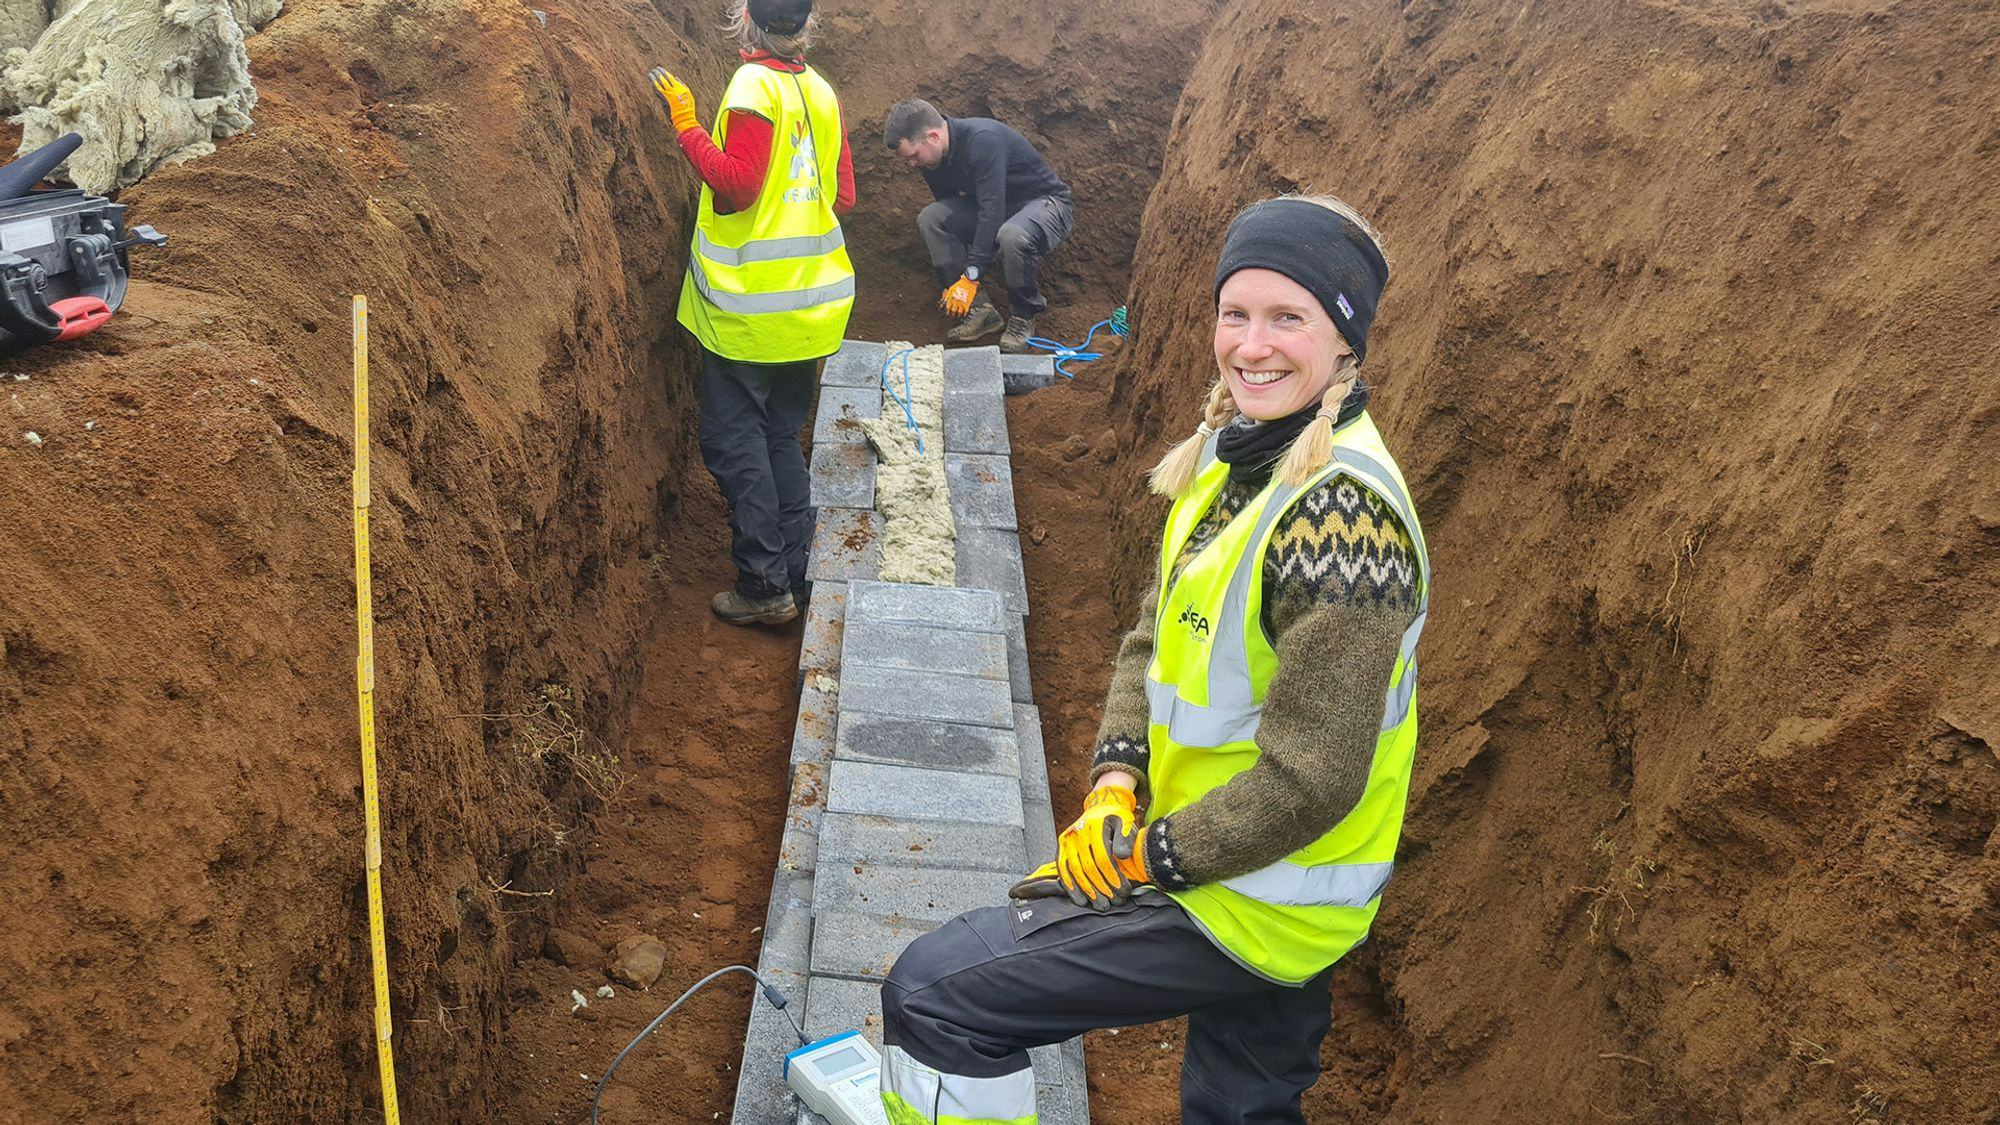 A woman with a smile, accompanied by another woman and a man at a dug-up site